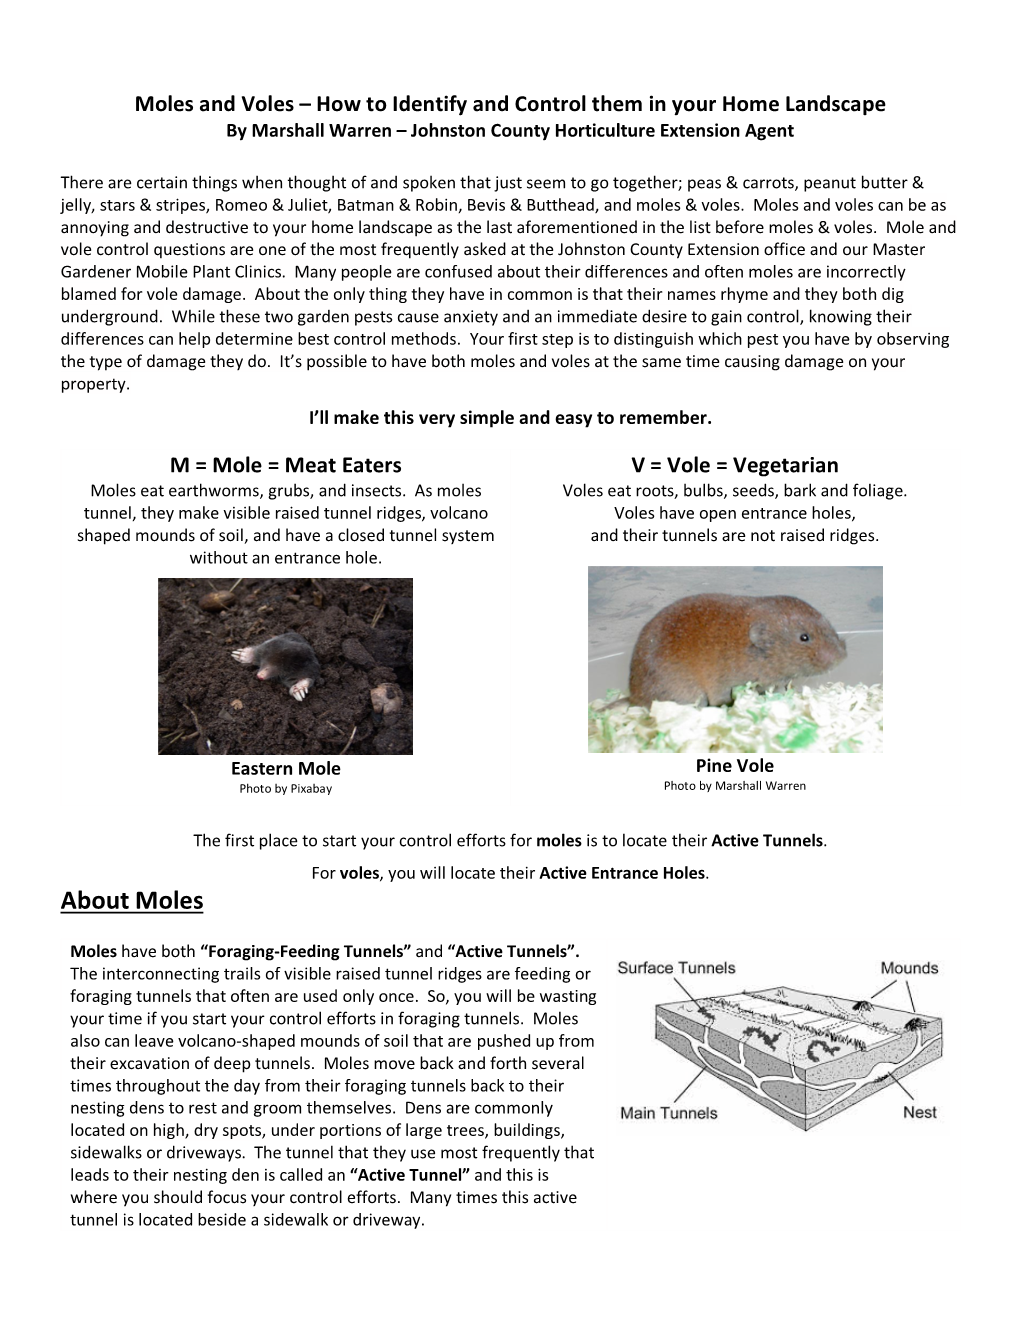 Moles and Voles – How to Identify and Control Them in Your Home Landscape by Marshall Warren – Johnston County Horticulture Extension Agent